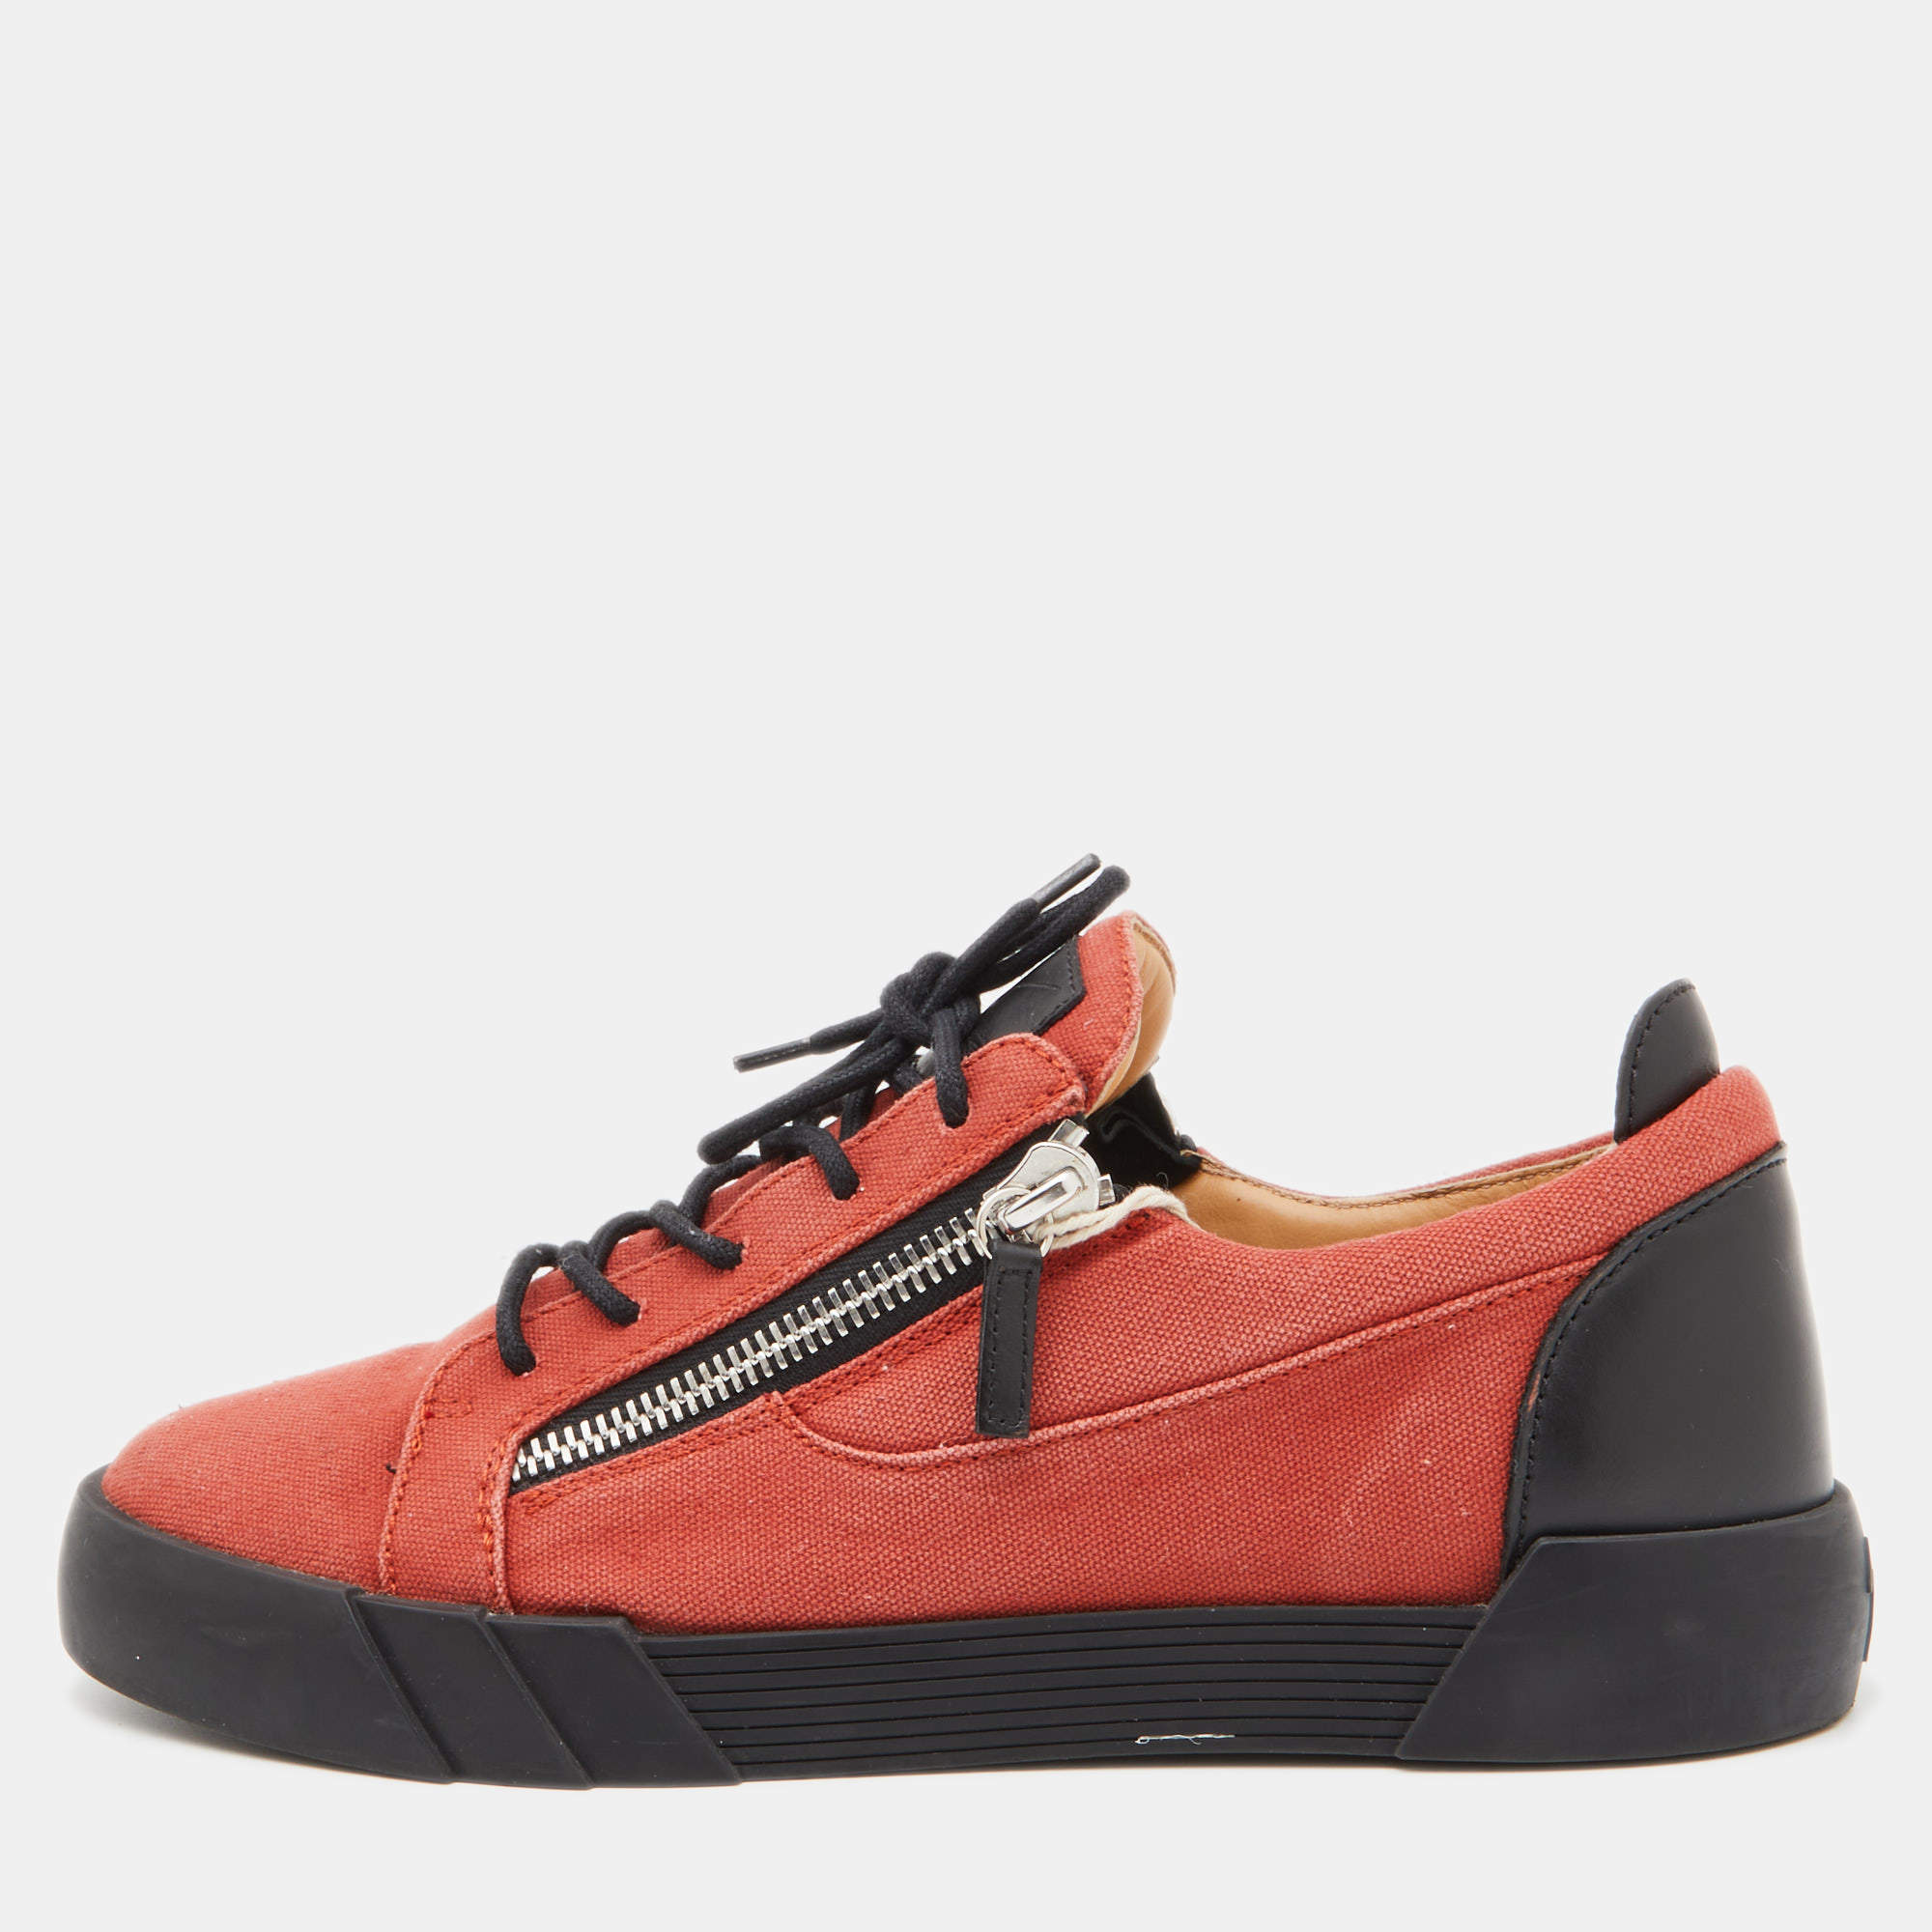 Gisueppe Zanotti Orange Canvas and Leather Zip Low Top Sneakers Size 43 Giuseppe | TLC